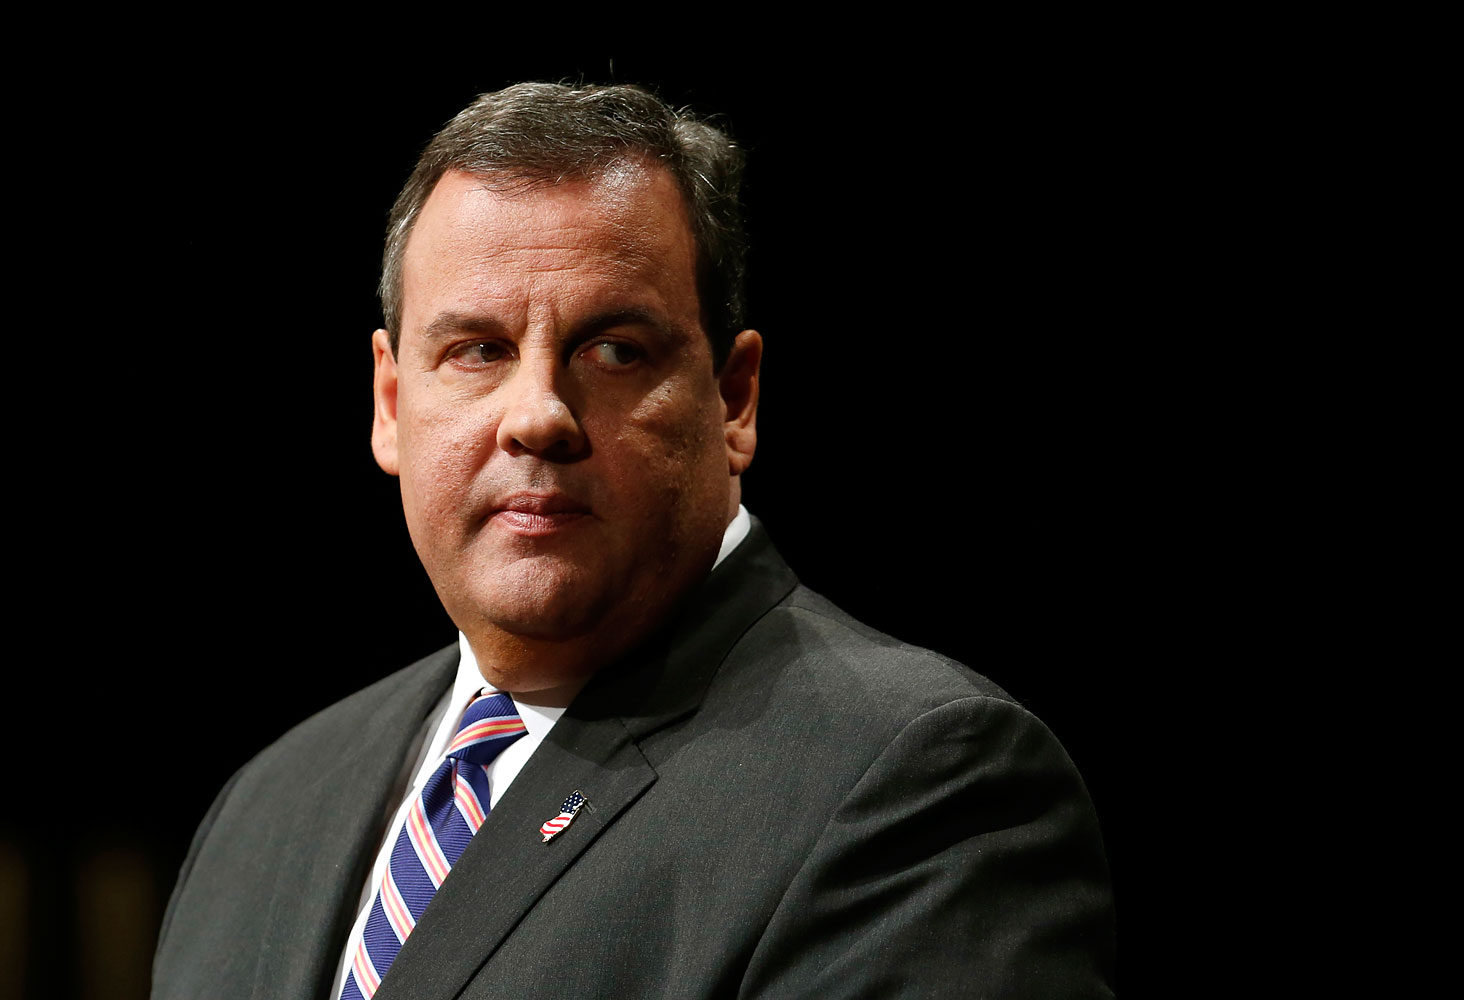 New Jersey Governor Chris Christie delivers as address after being sworn in for his second term as governor